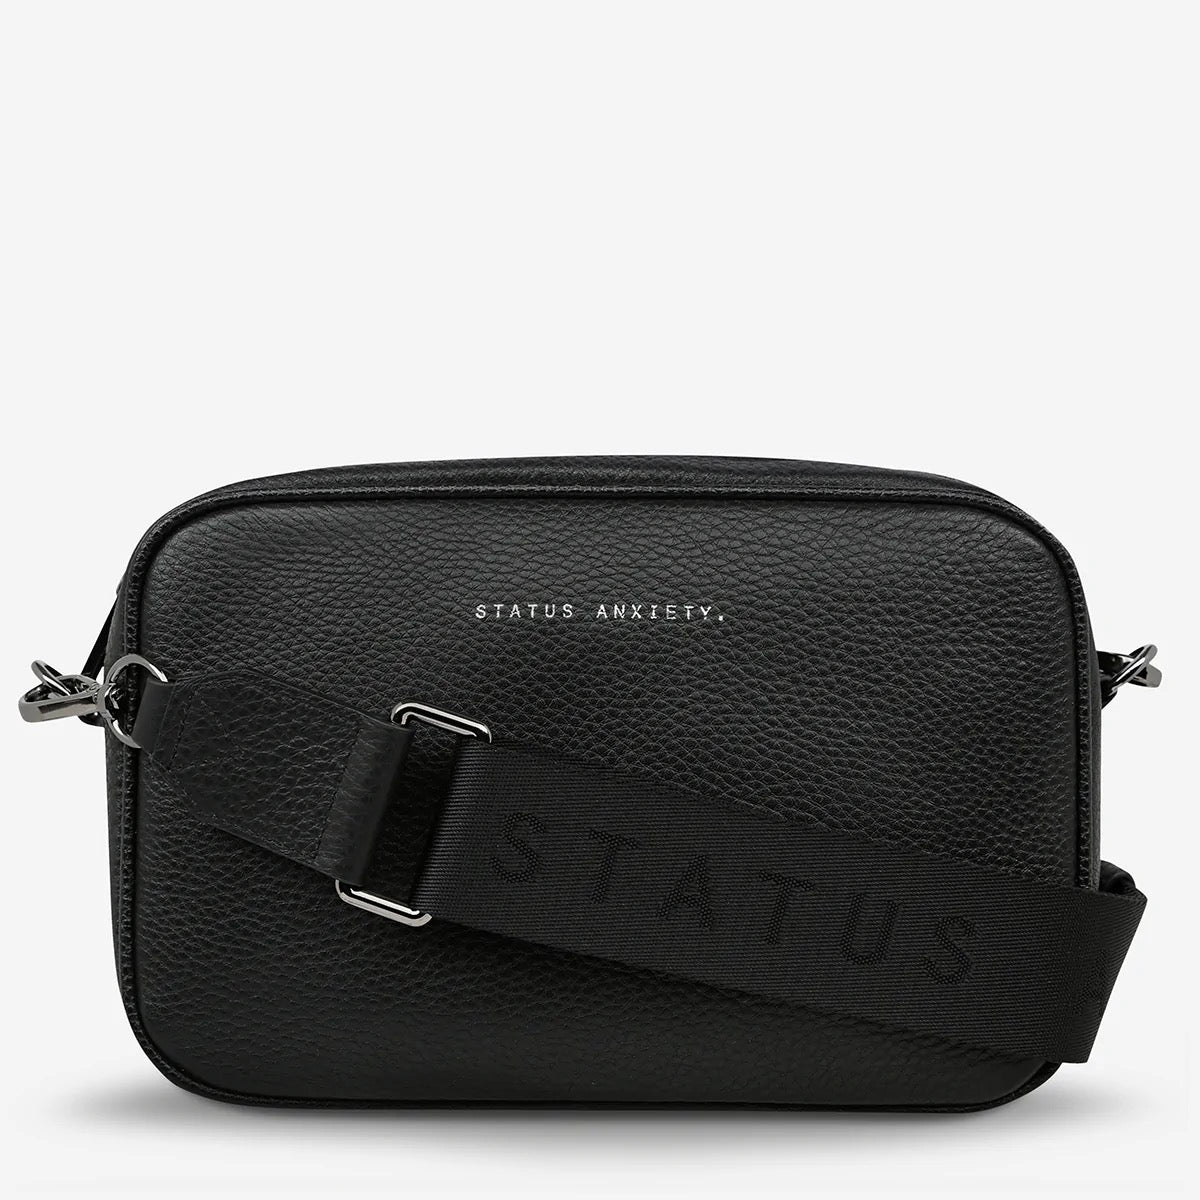 Status Anxiety - Plunder Bag With Webbed Strap - Black